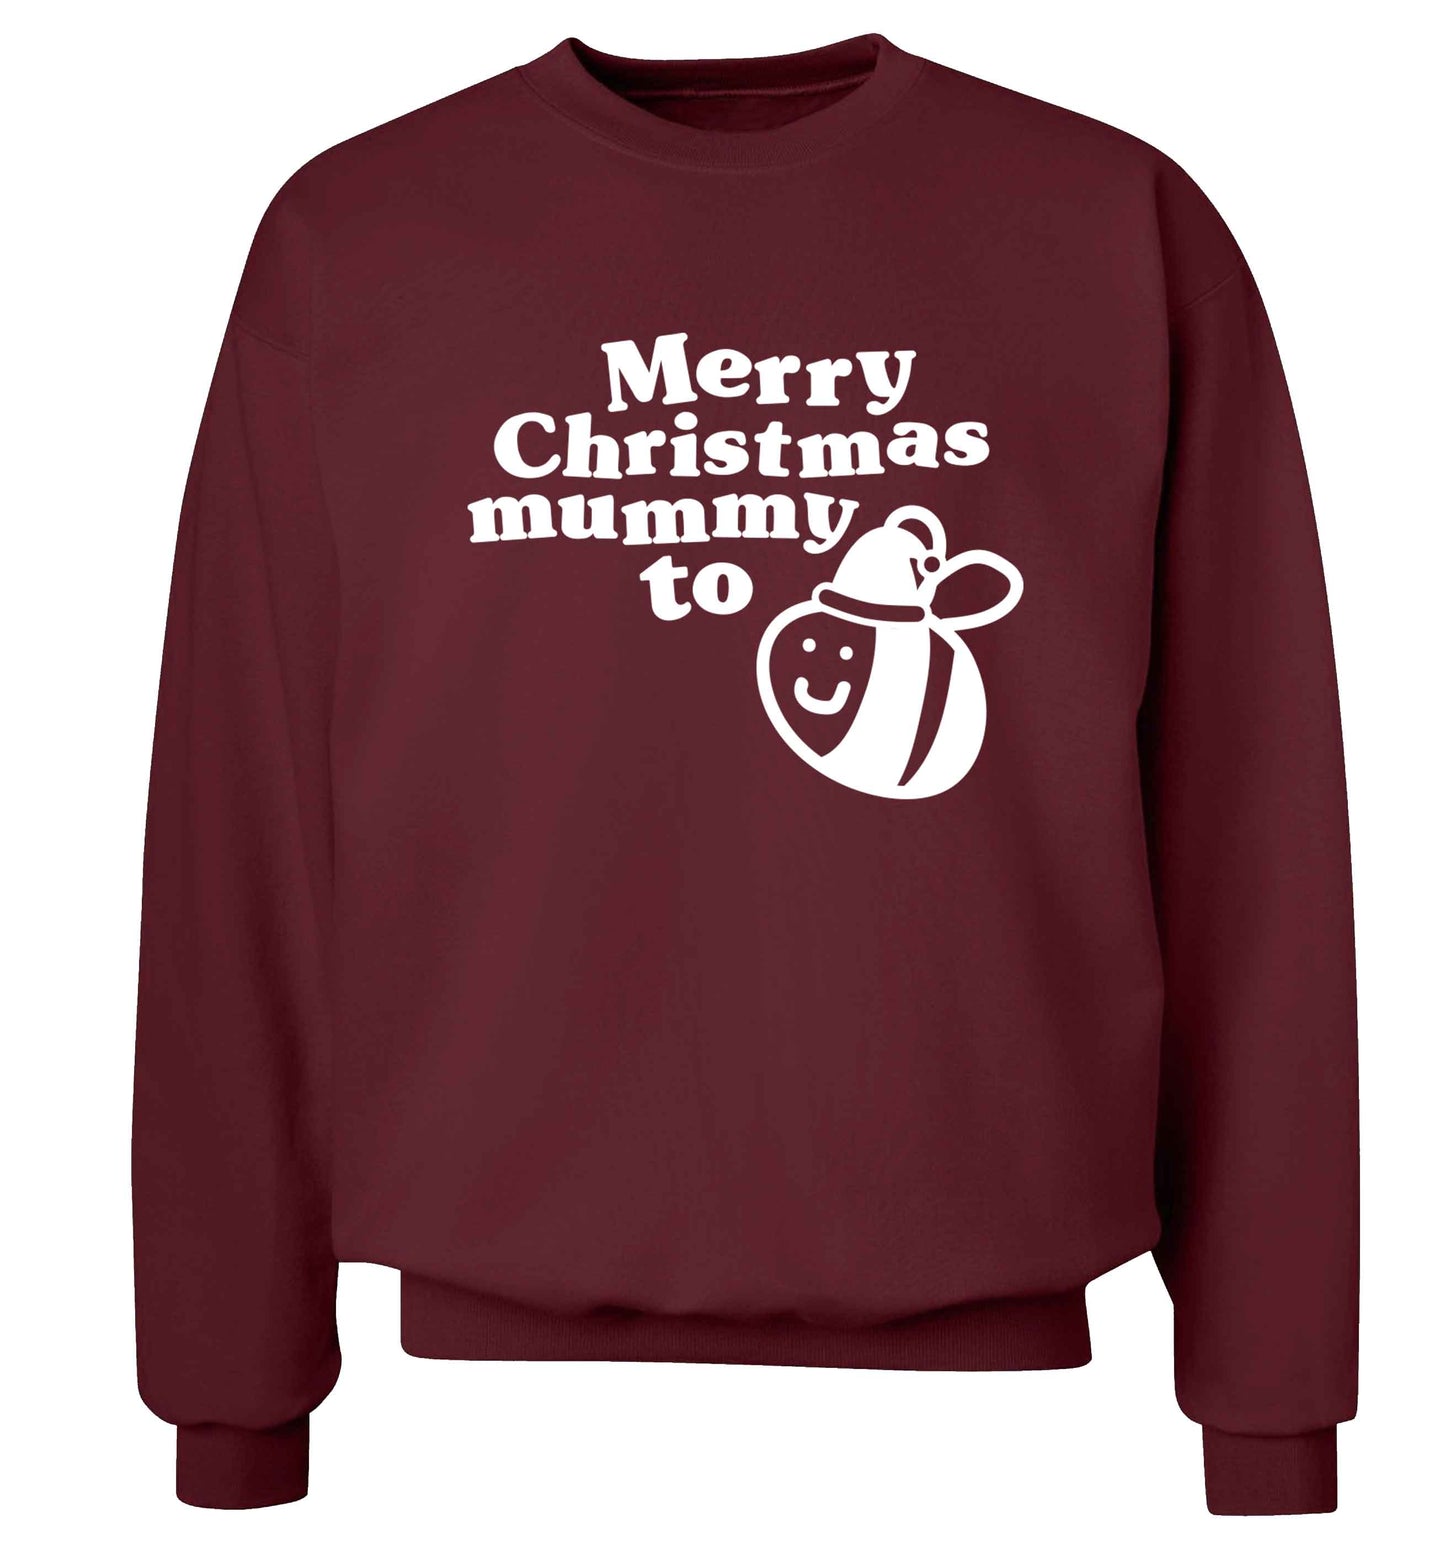 Merry Christmas mummy to be Adult's unisex maroon Sweater 2XL